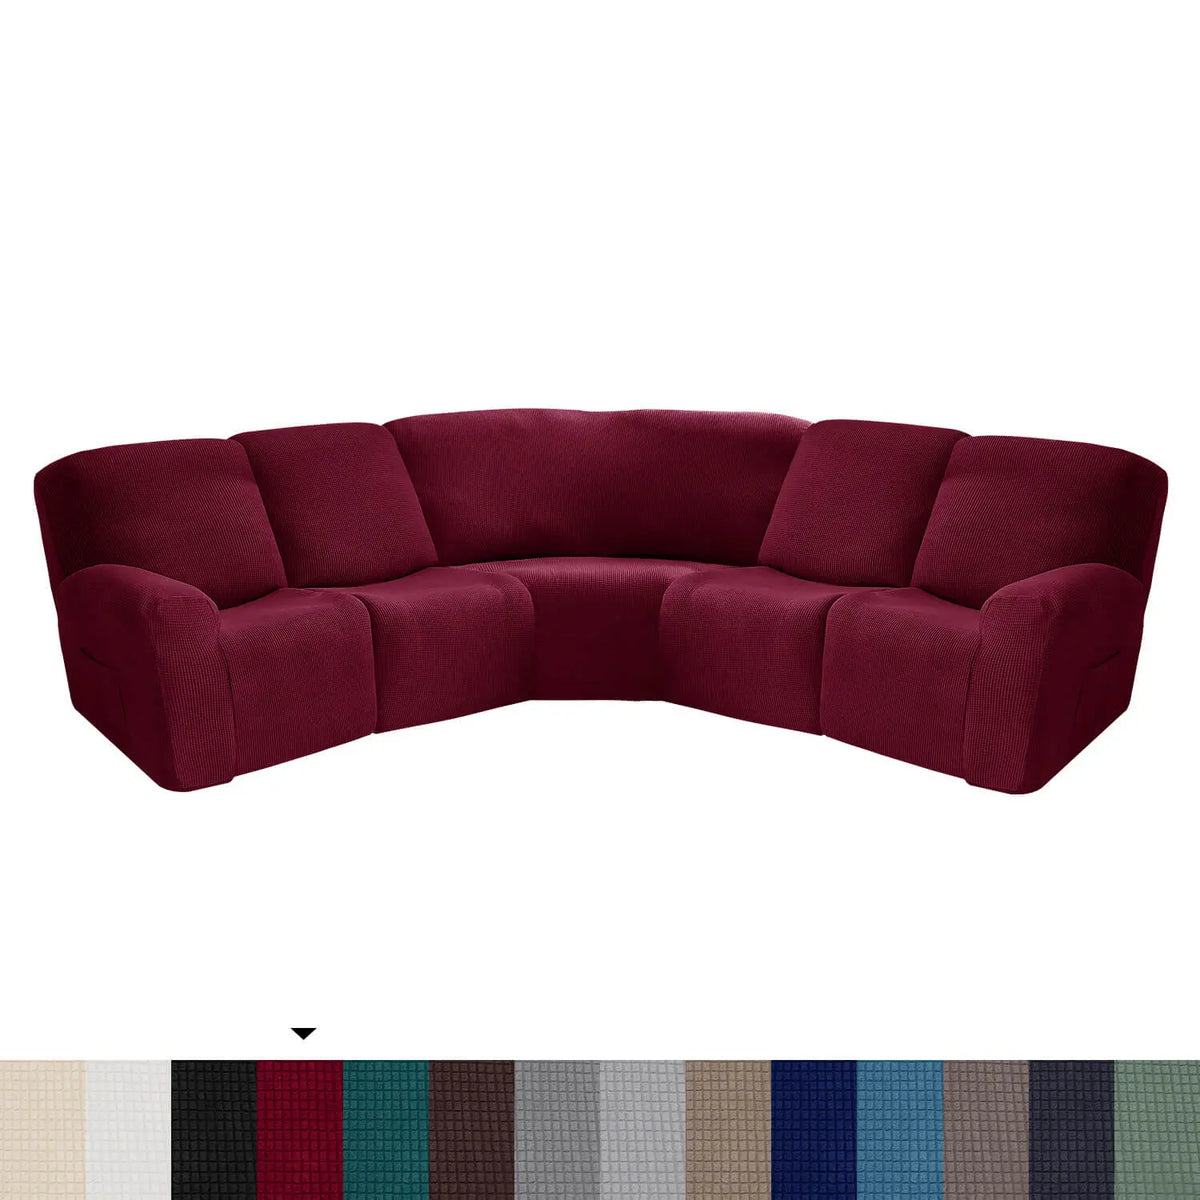 Crfatop L Shape Sectional Recliner Sofa Covers Corner Couch Covers Wine